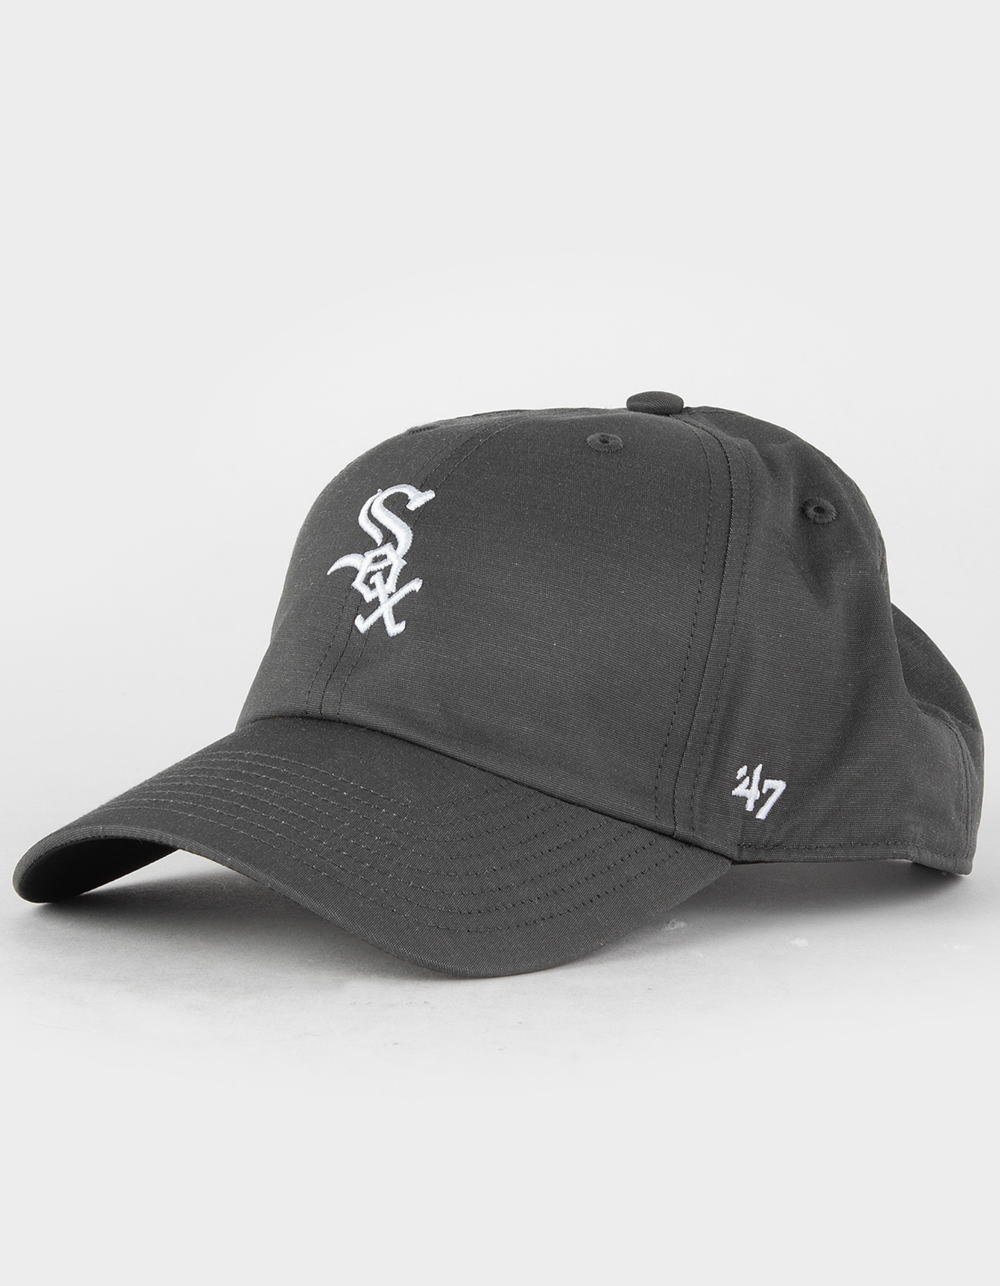 Chicago White Sox Mens Black Friday Deals, Clearance White Sox Apparel,  Discounted White Sox Gear